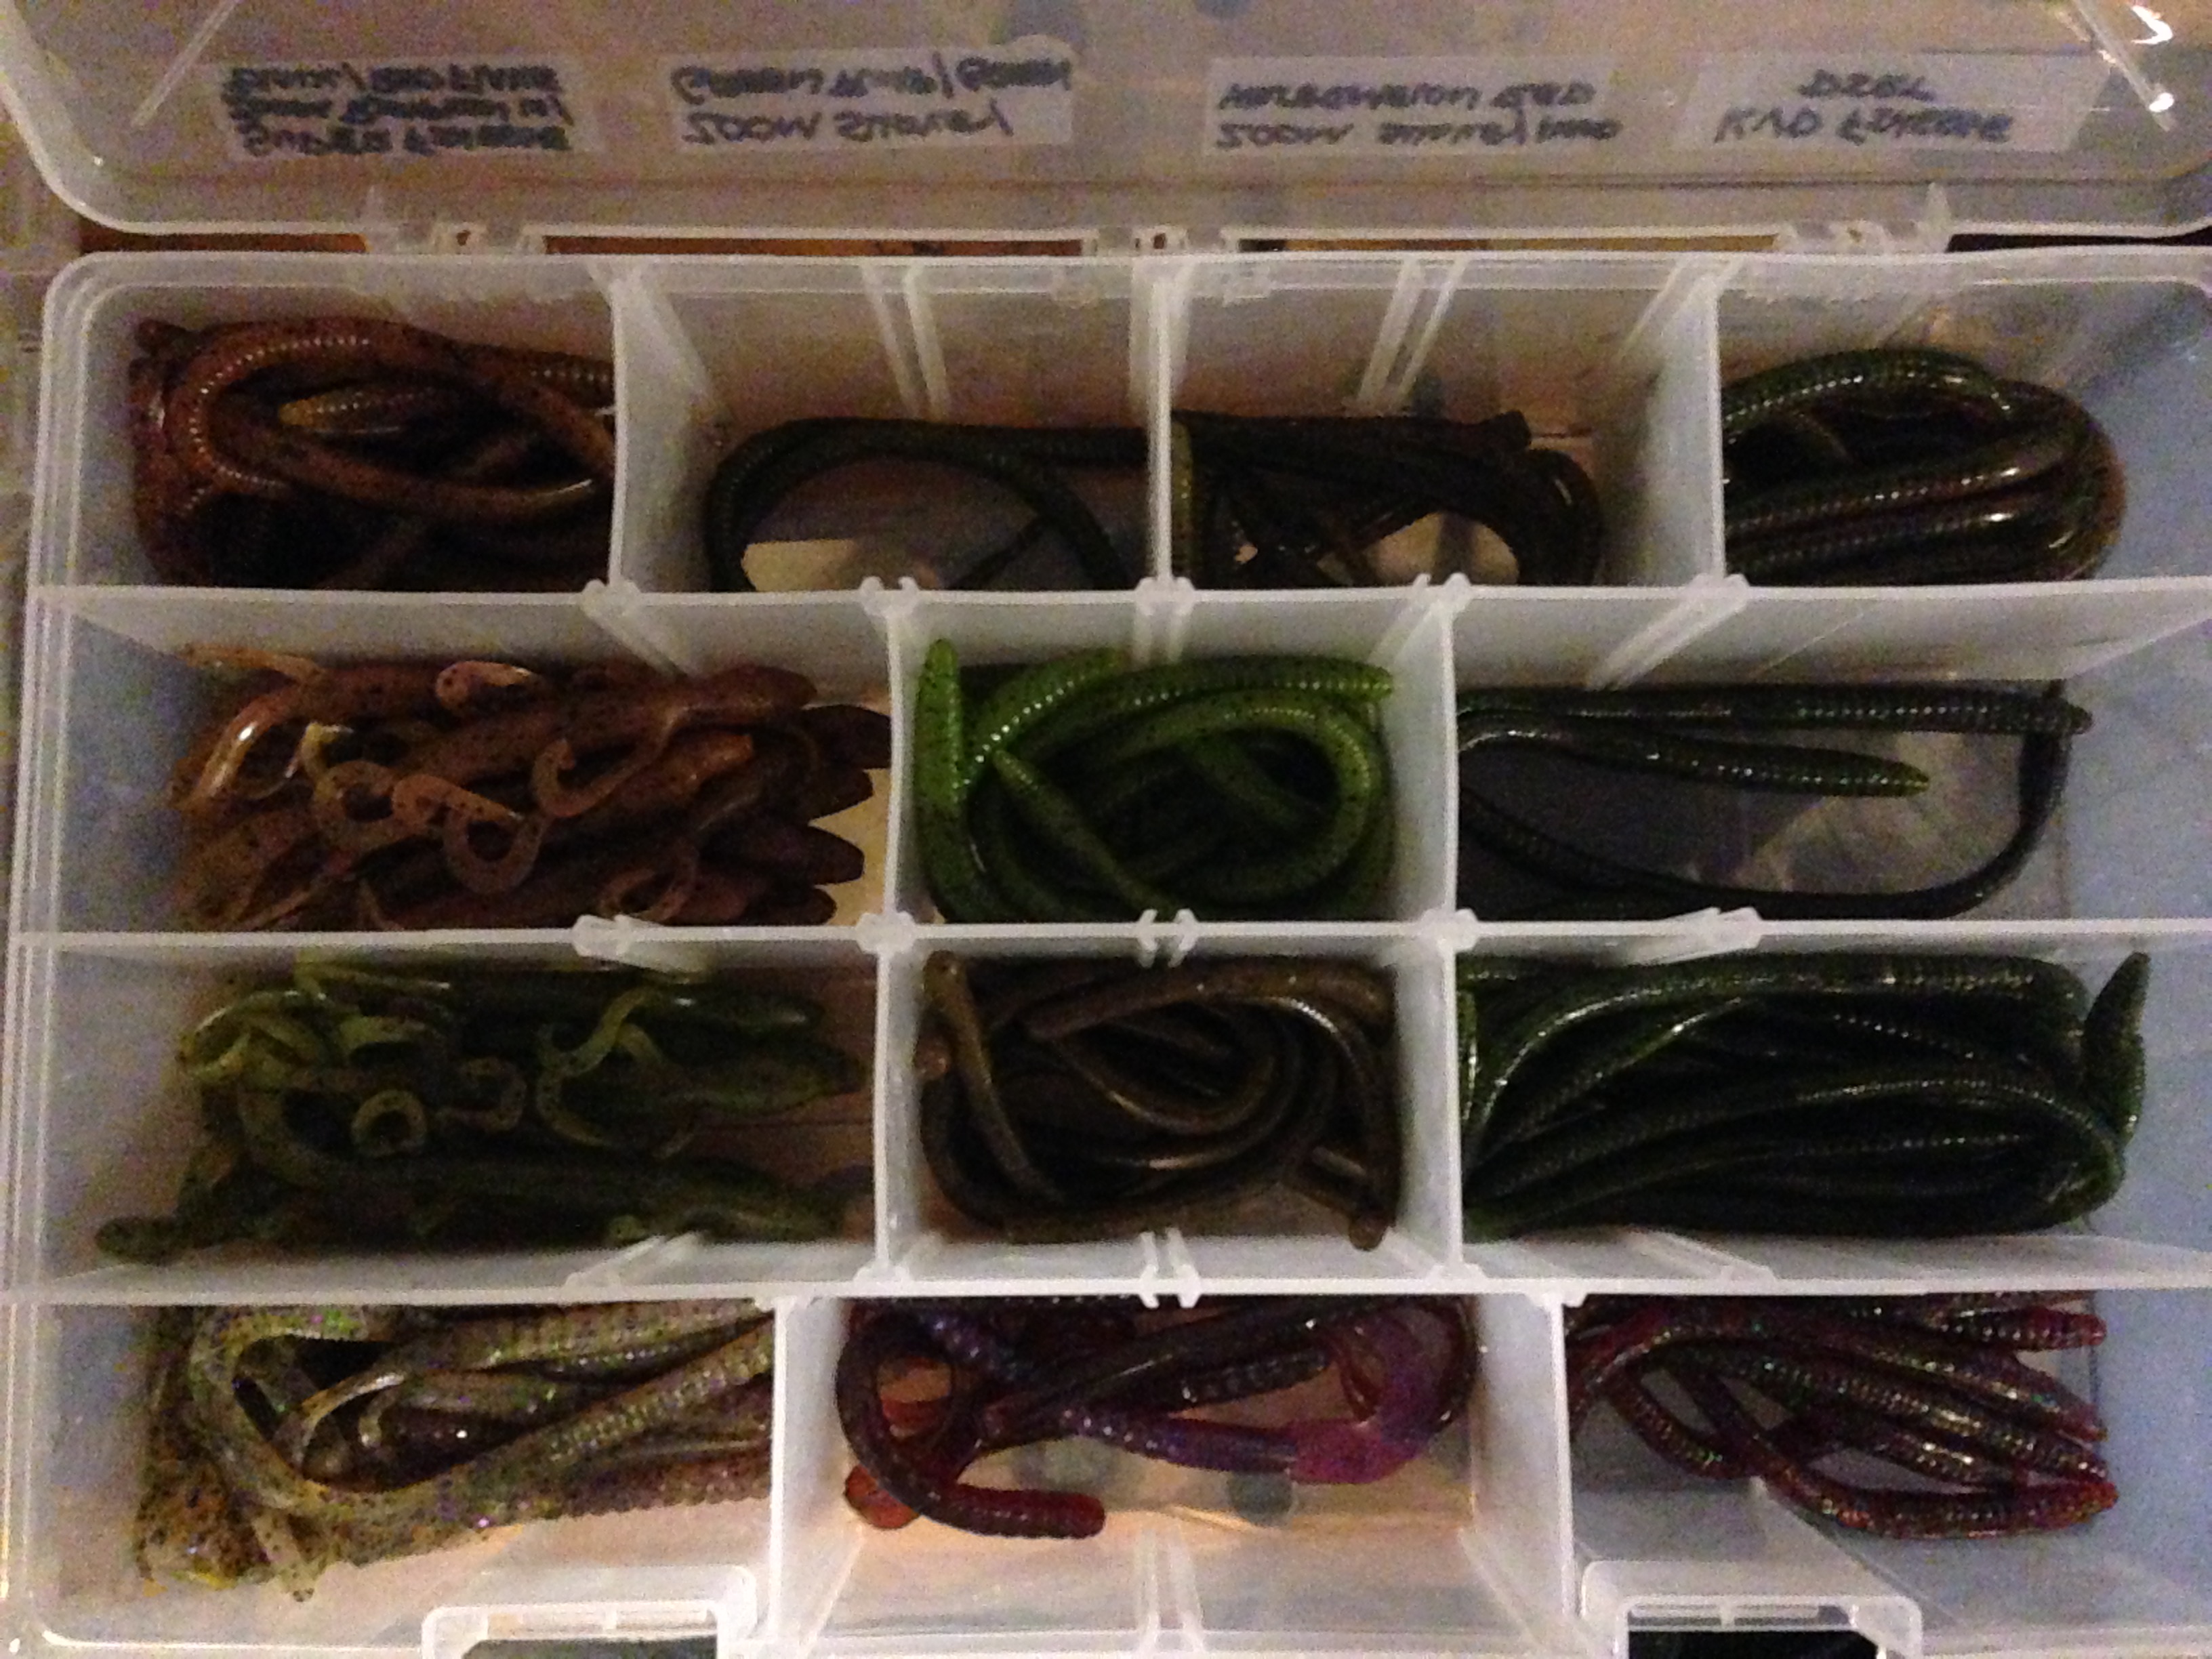 Soft plastics in bags or tackle box? - Fishing Tackle - Bass Fishing Forums